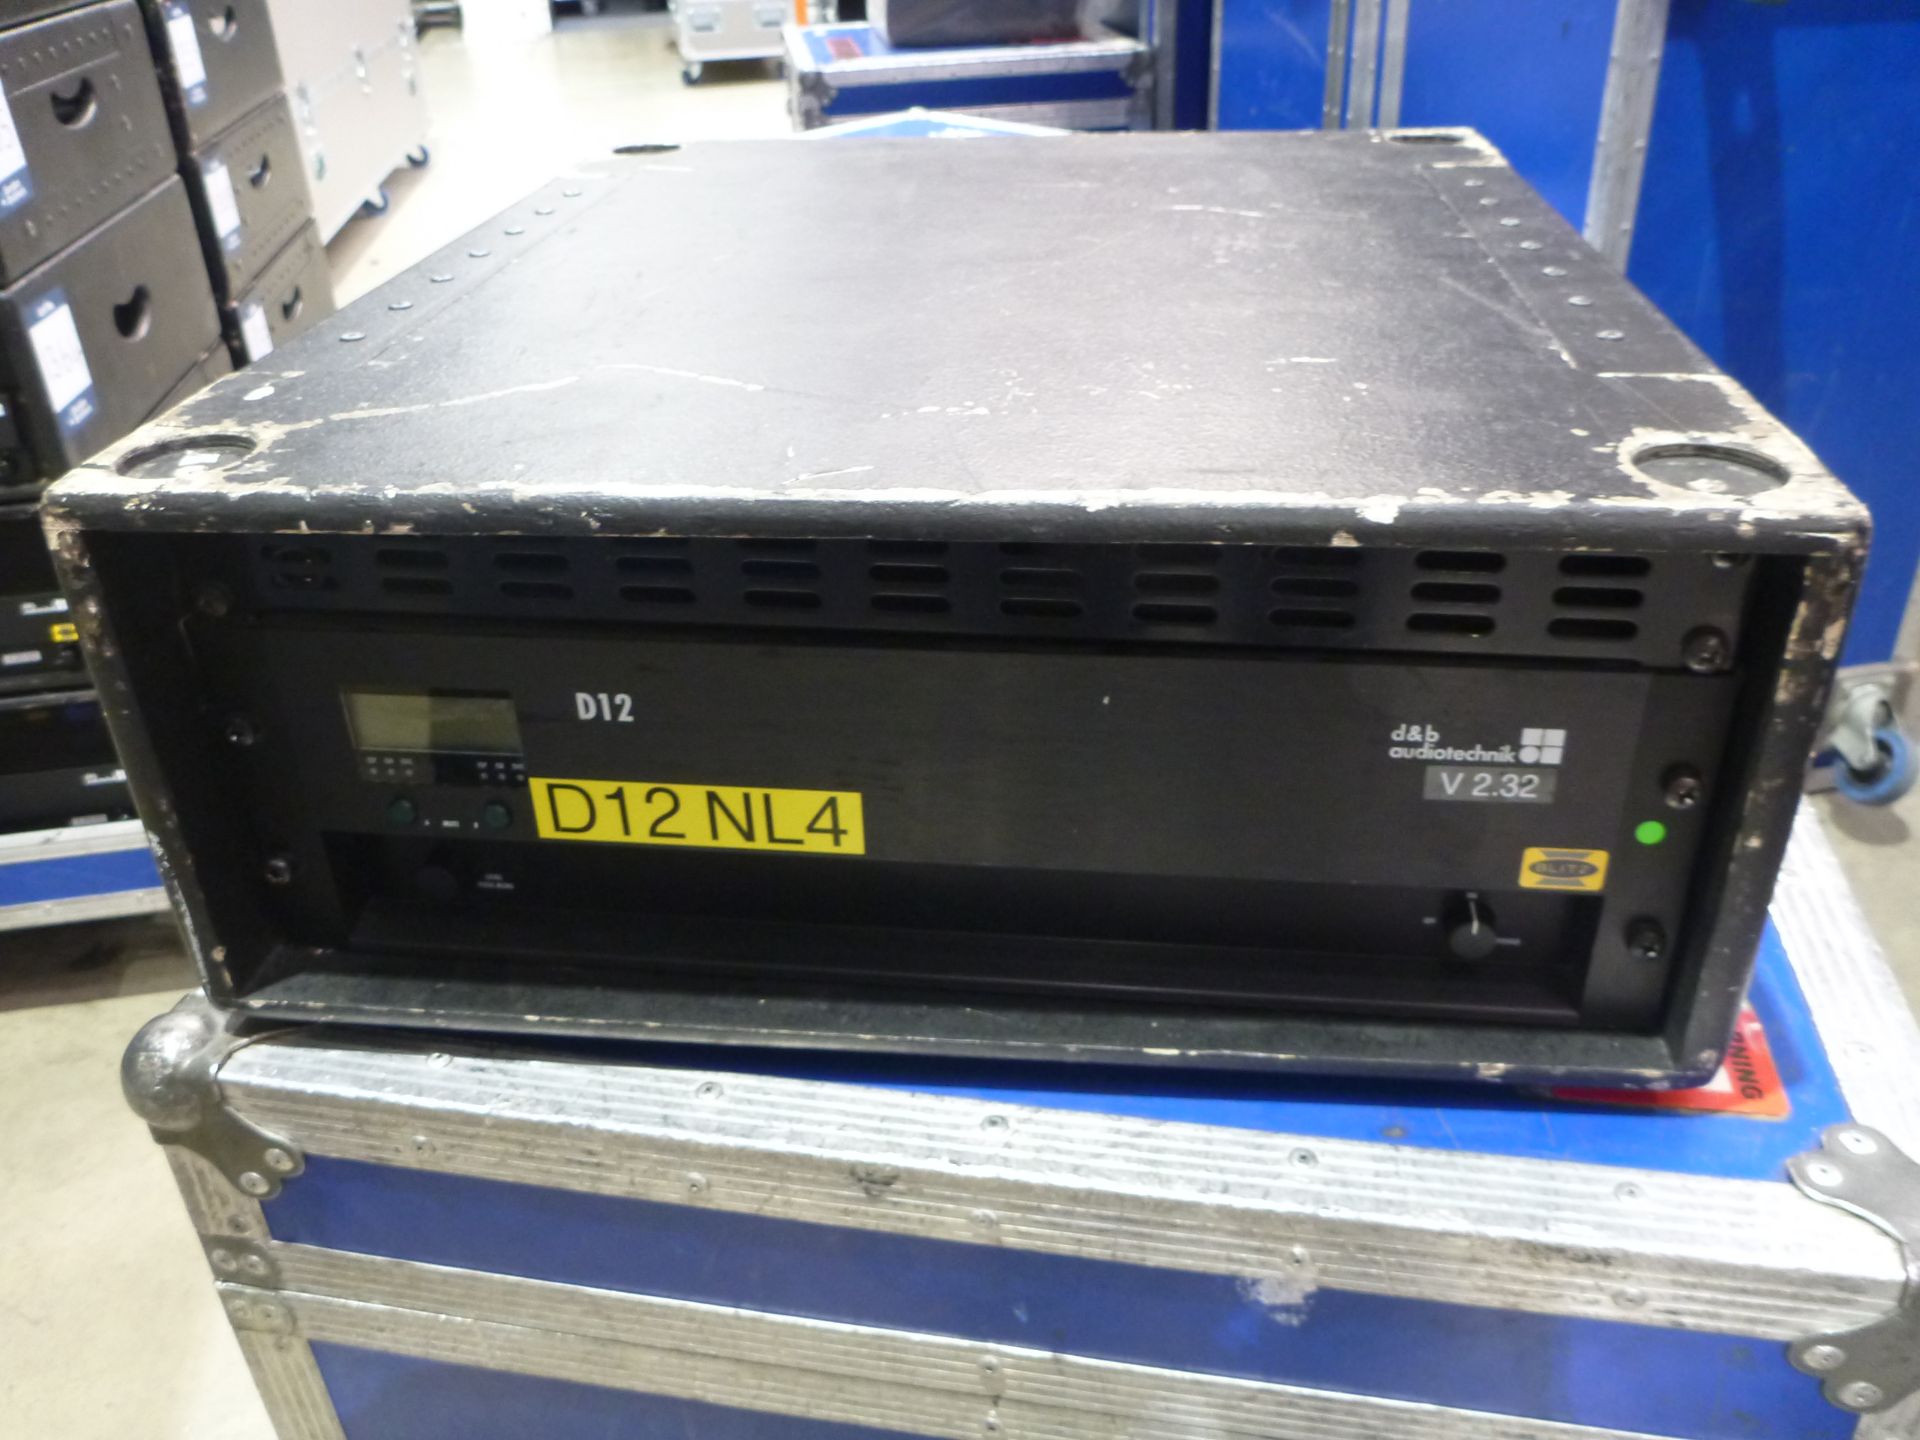 D & B Audiotecknik D12 NL4 2 Chnl Power Amplifier. Mounted in rack mount box, 13A to powercon cable.